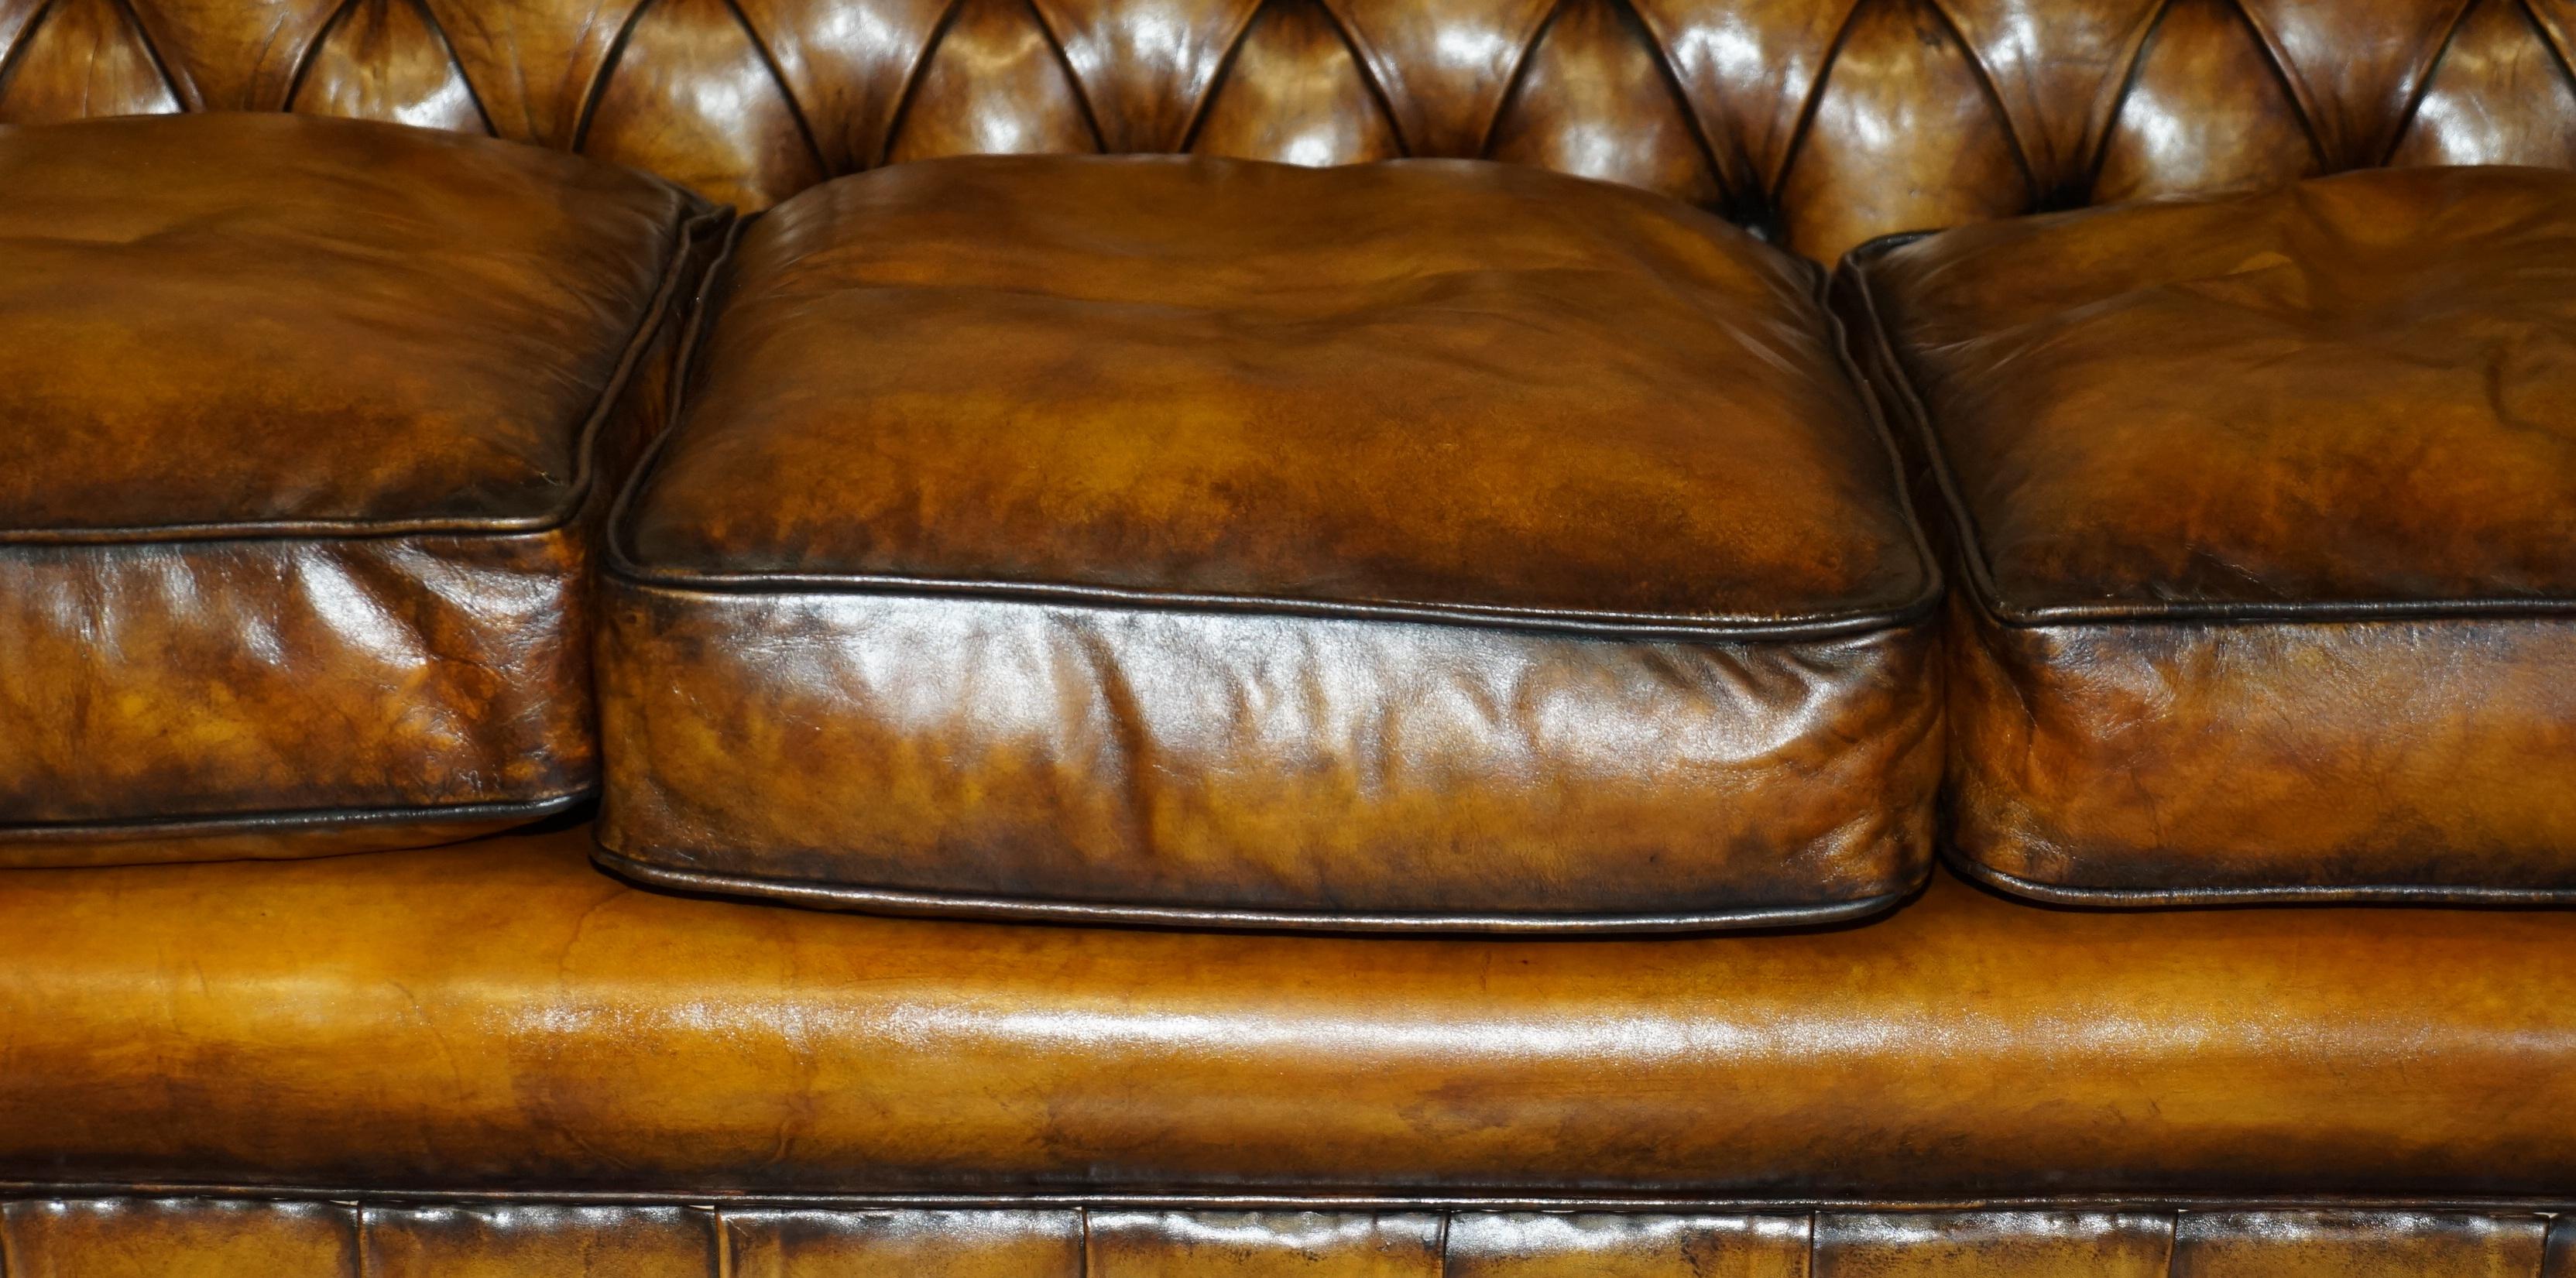 SUPER RARE FULLY RESTORED ViNTAGE CIGAR BROWN LEATHER CHESTERFIELD SOFA PART SET For Sale 4